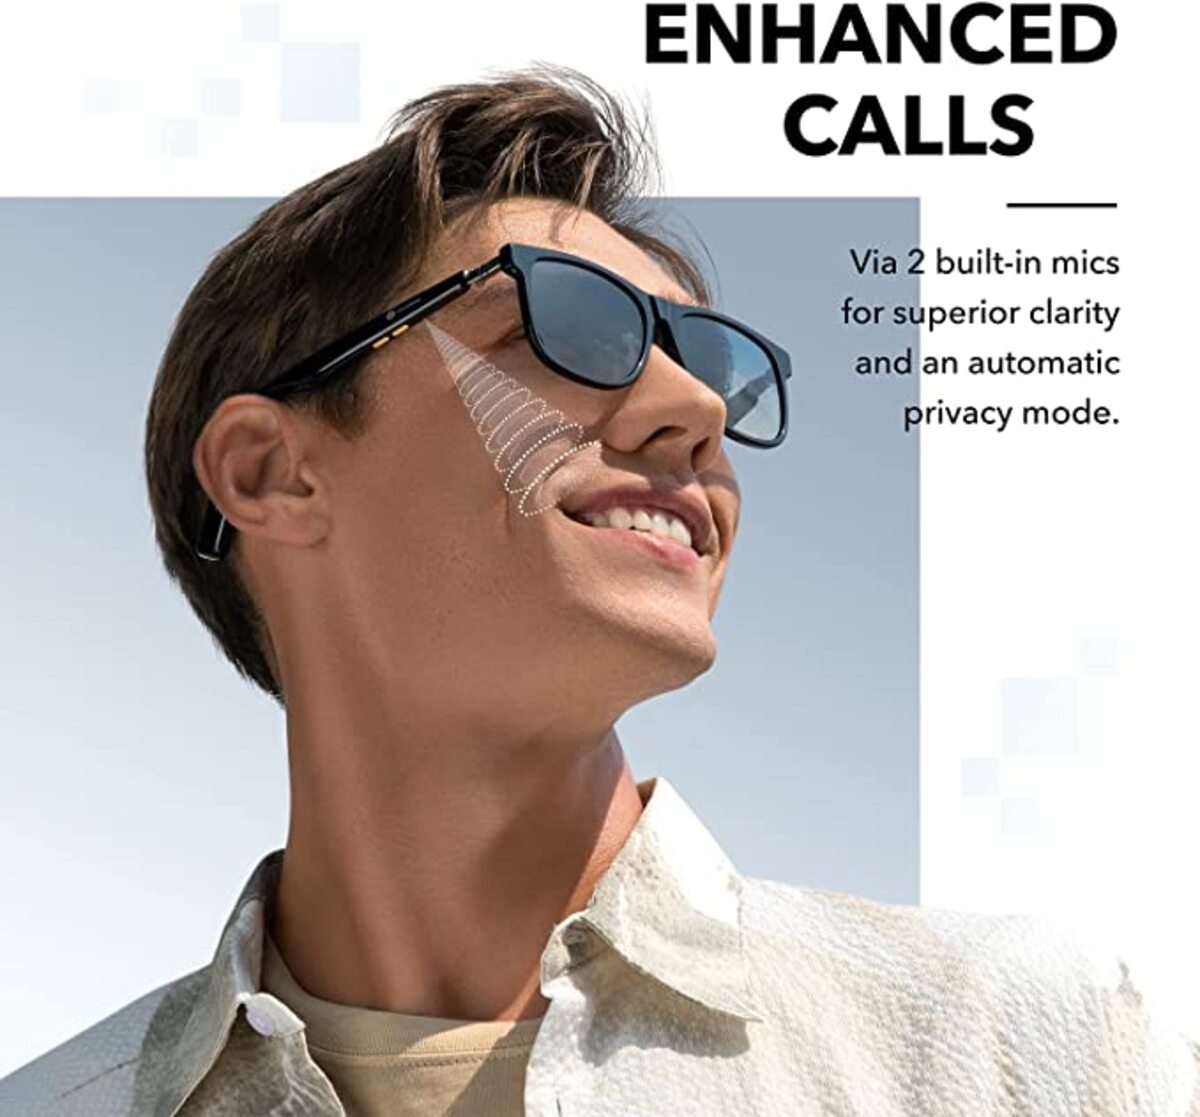 Soundcore by Anker, Soundcore Frames Wander Bluetooth Audio Smart Glasses, Interchangeable Frames, Open Ear Surround Sound with 4 Speakers, Polarized Lenses, 2 Mics, Clear Calls, Voice Control, App